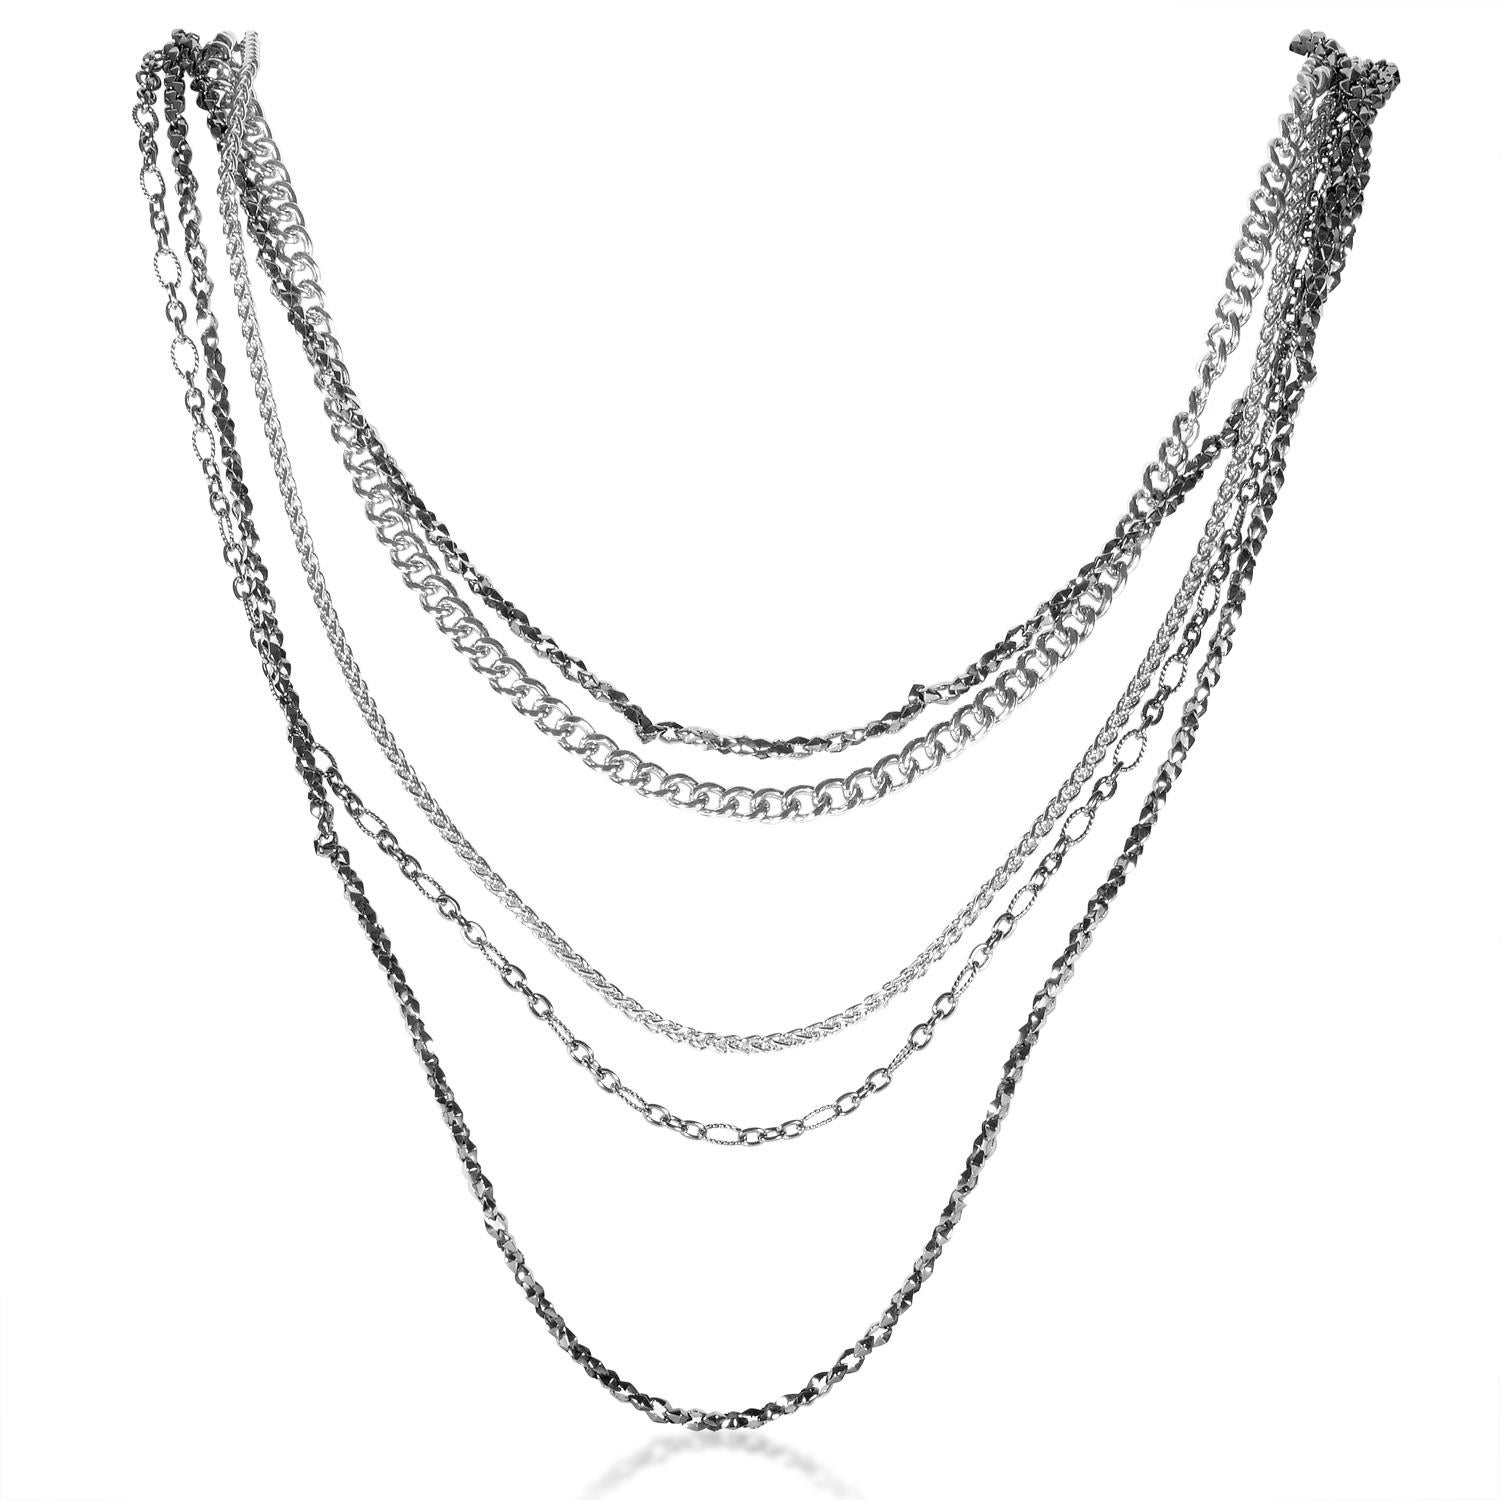 Multiple chains of diverse shape and thickness combine brilliantly in this exceptional silver necklace from Stephen Webster's Superstud collection to create an intriguing appearance, joined at the center with several rings which allure with their